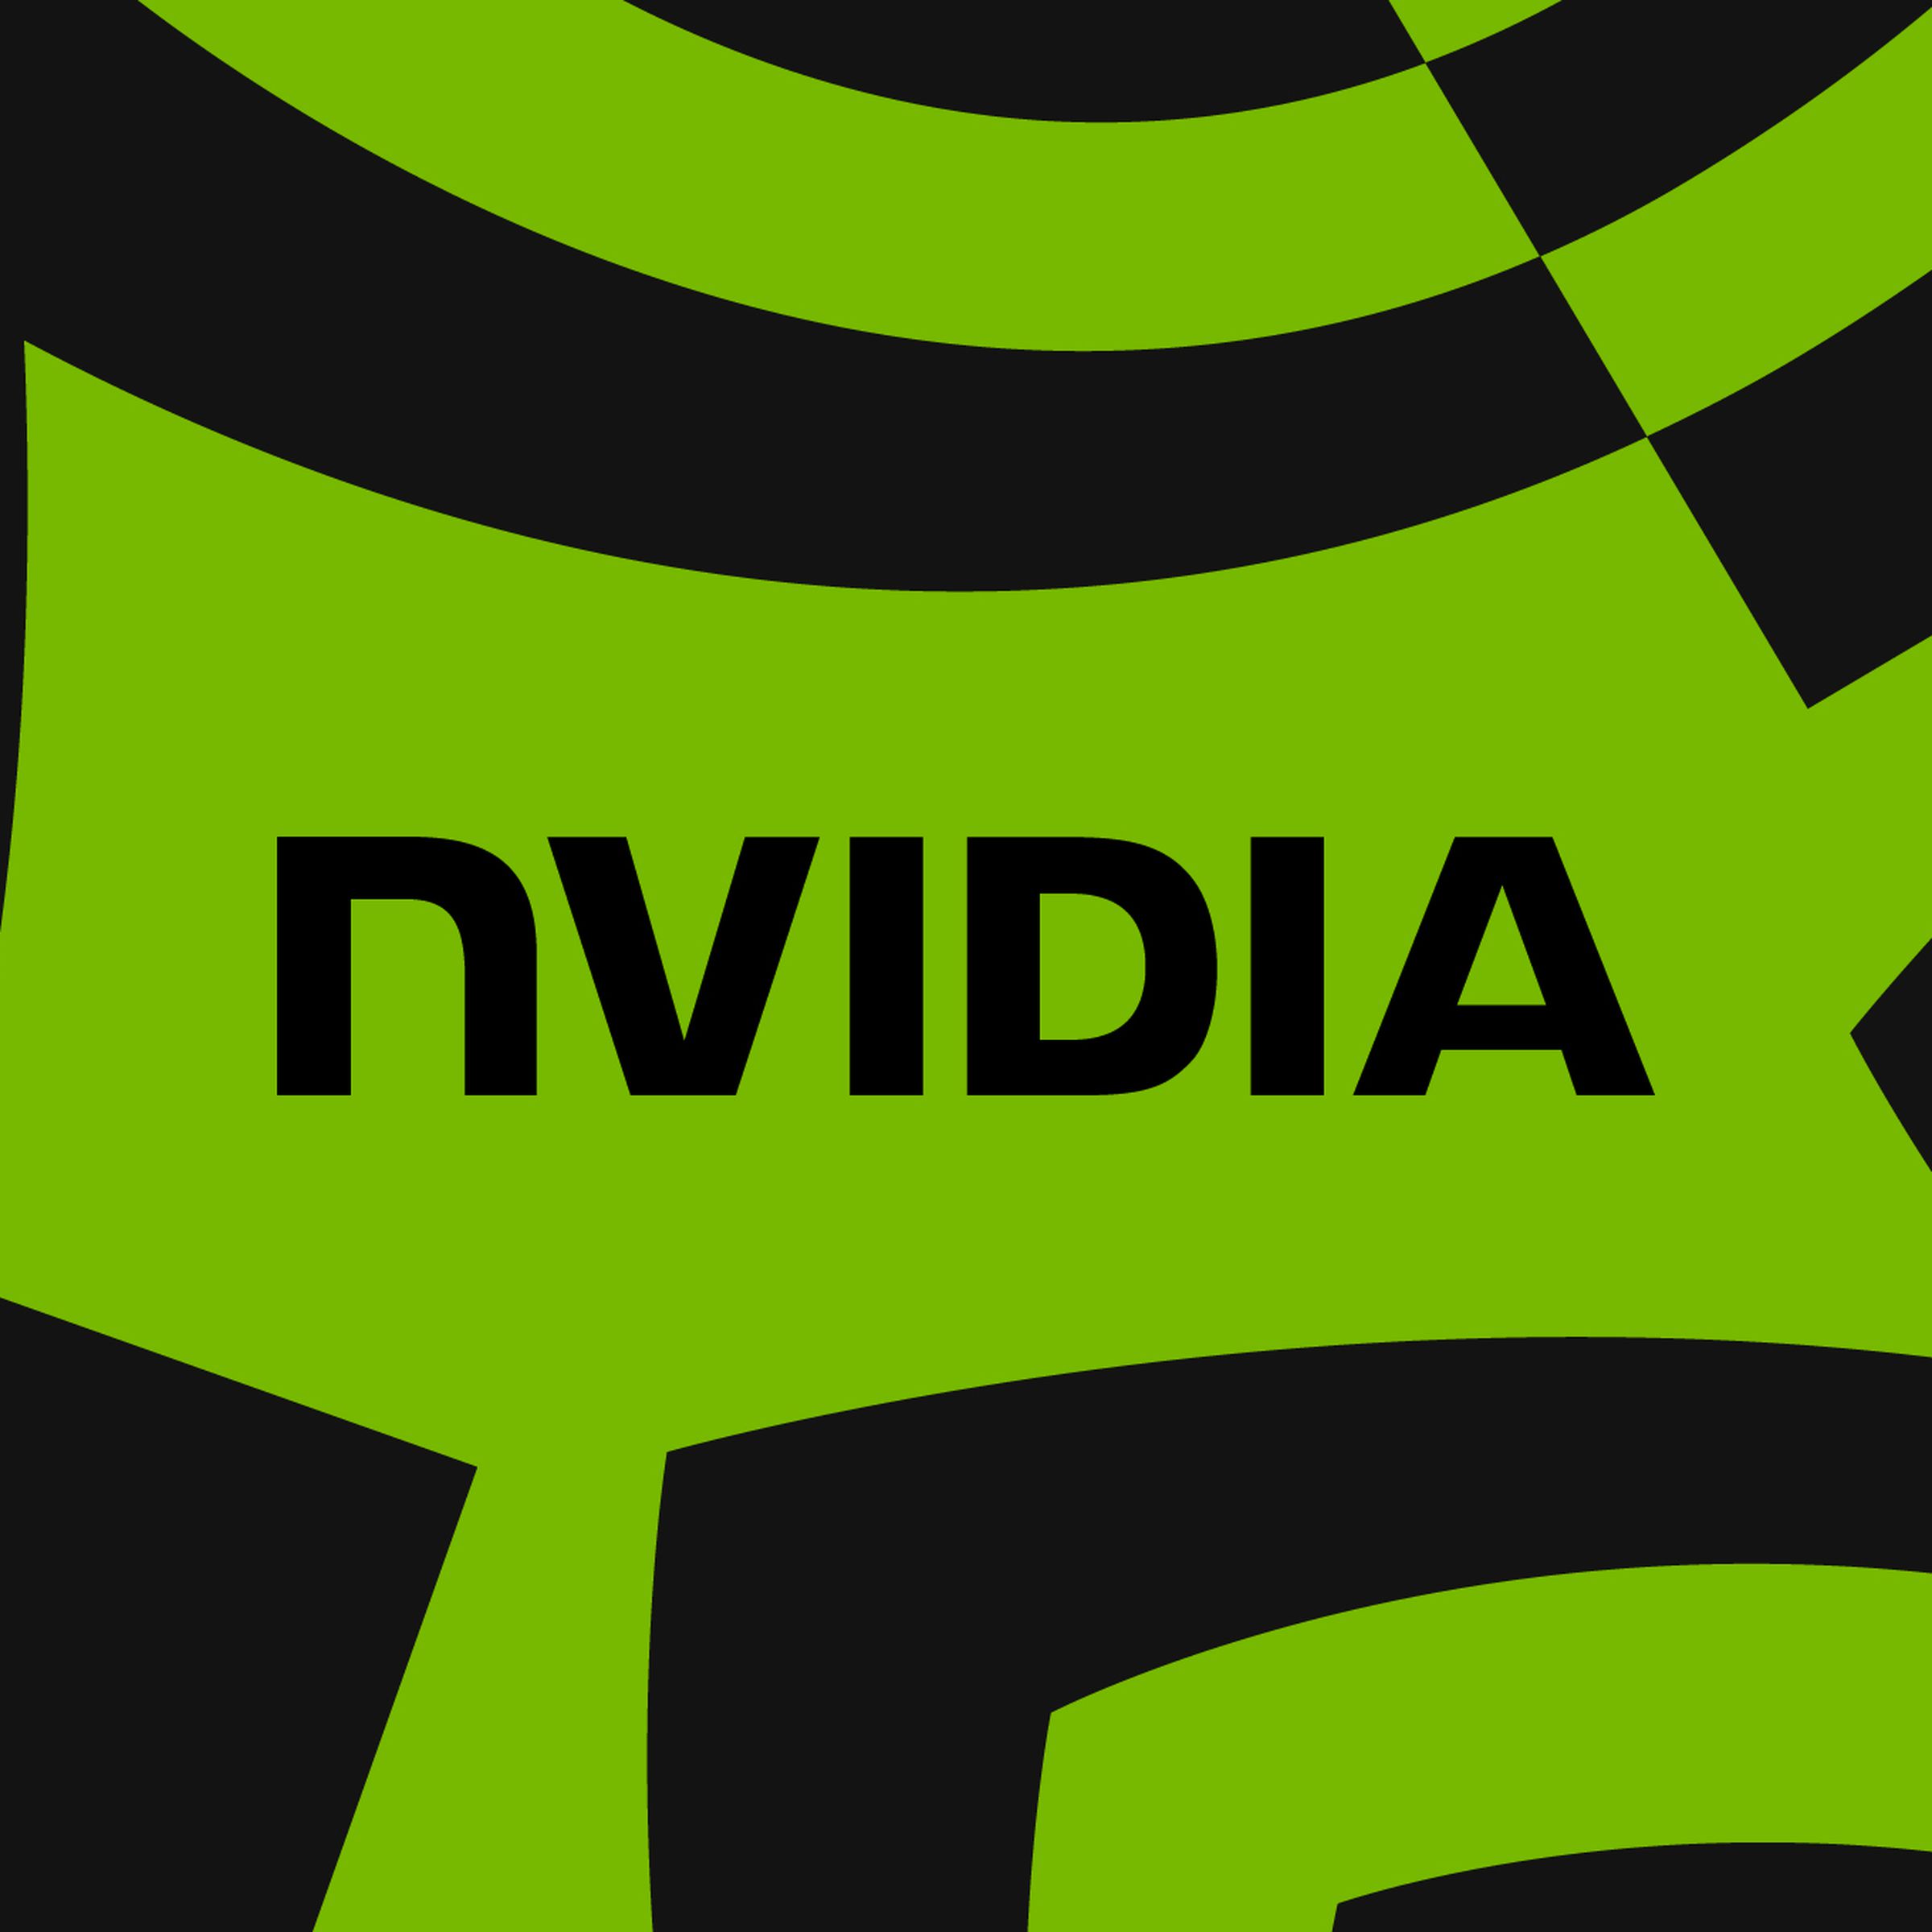 Illustration of the Nvidia wordmark on a green and black background.